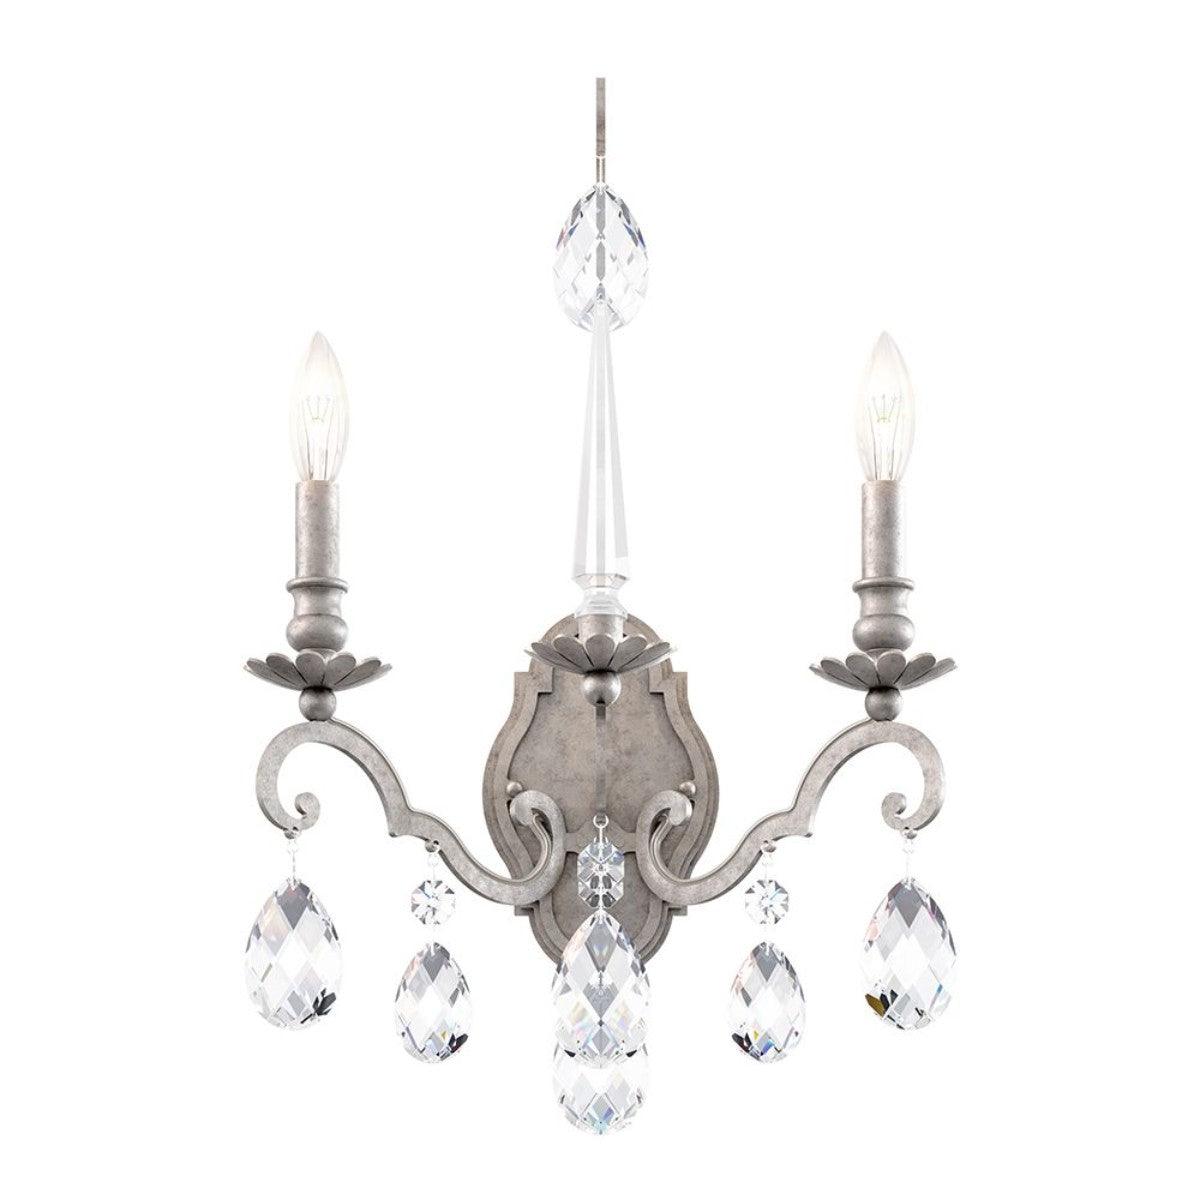 Renaissance Nouveau 21 inch. Armed Sconce with Heritage Crystal - Bees Lighting